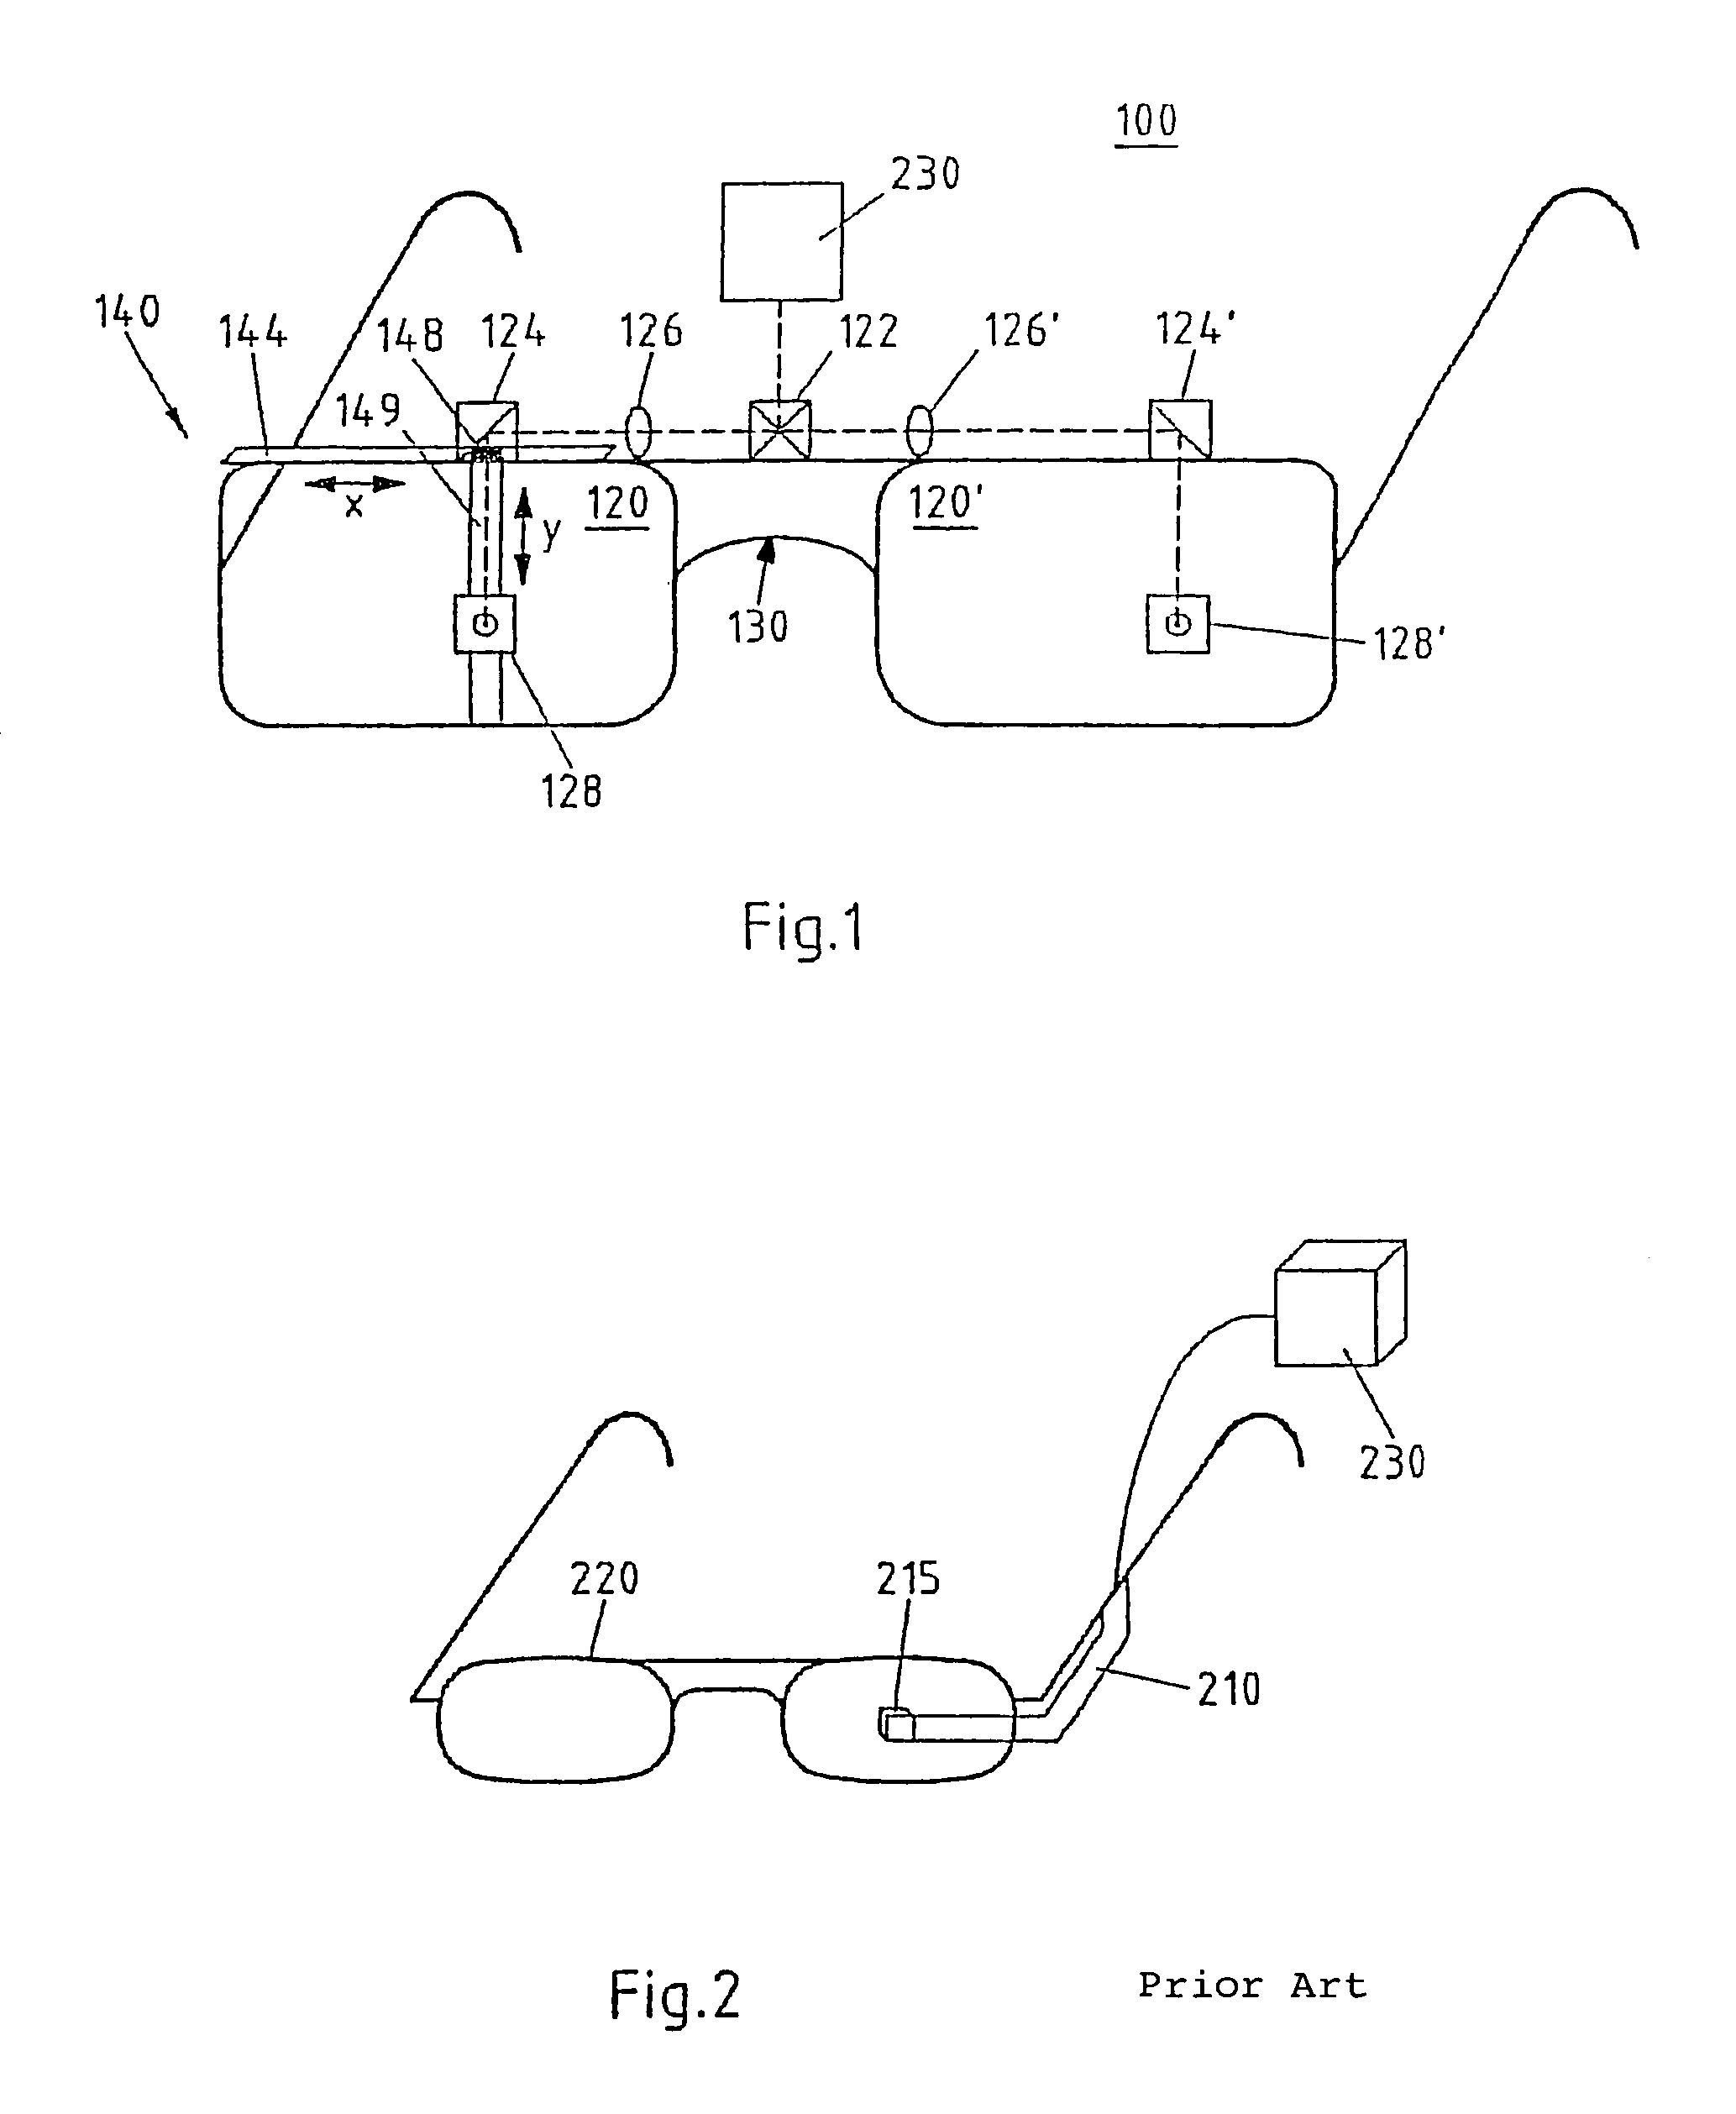 Head-mounted optical direct visualization system